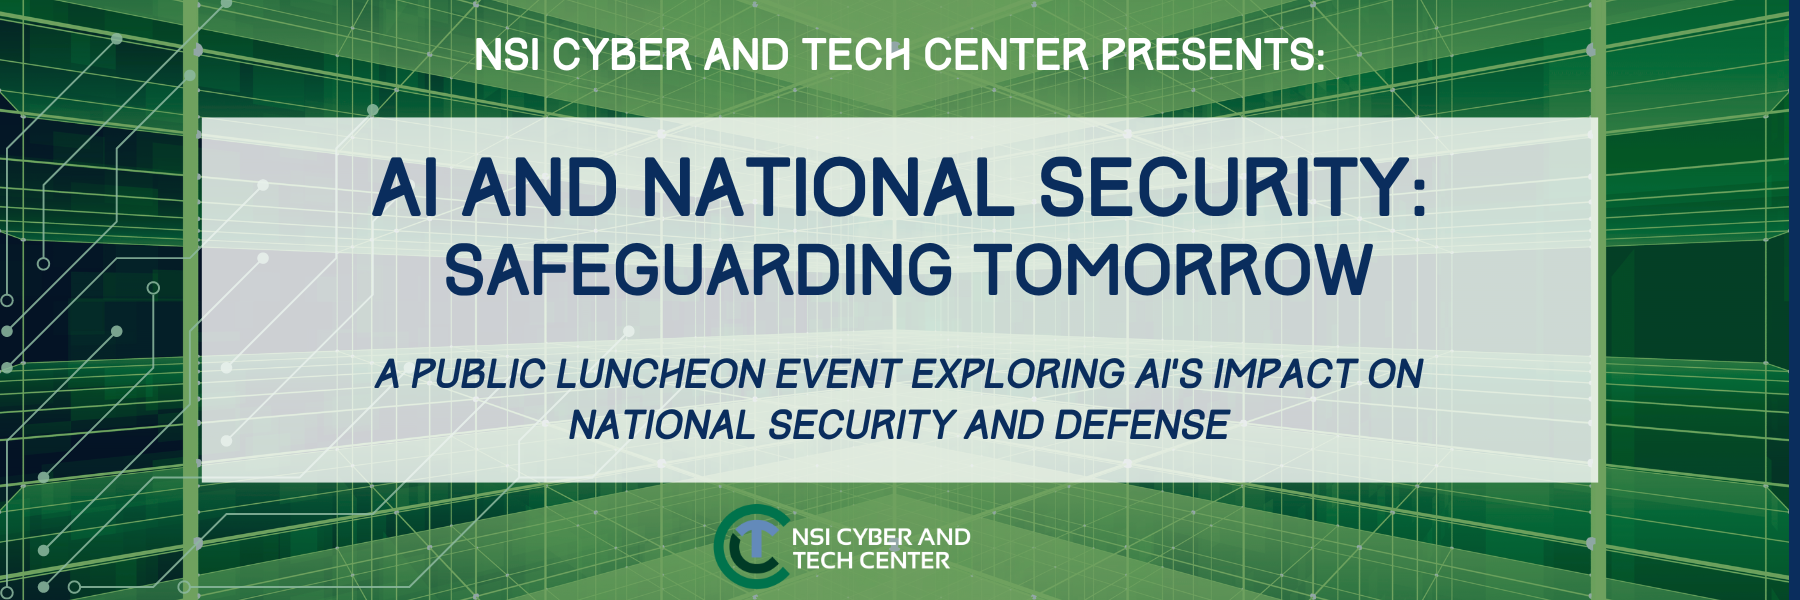 AI AND NATIONAL SECURITY PUBLIC LUNCHEON EVENT